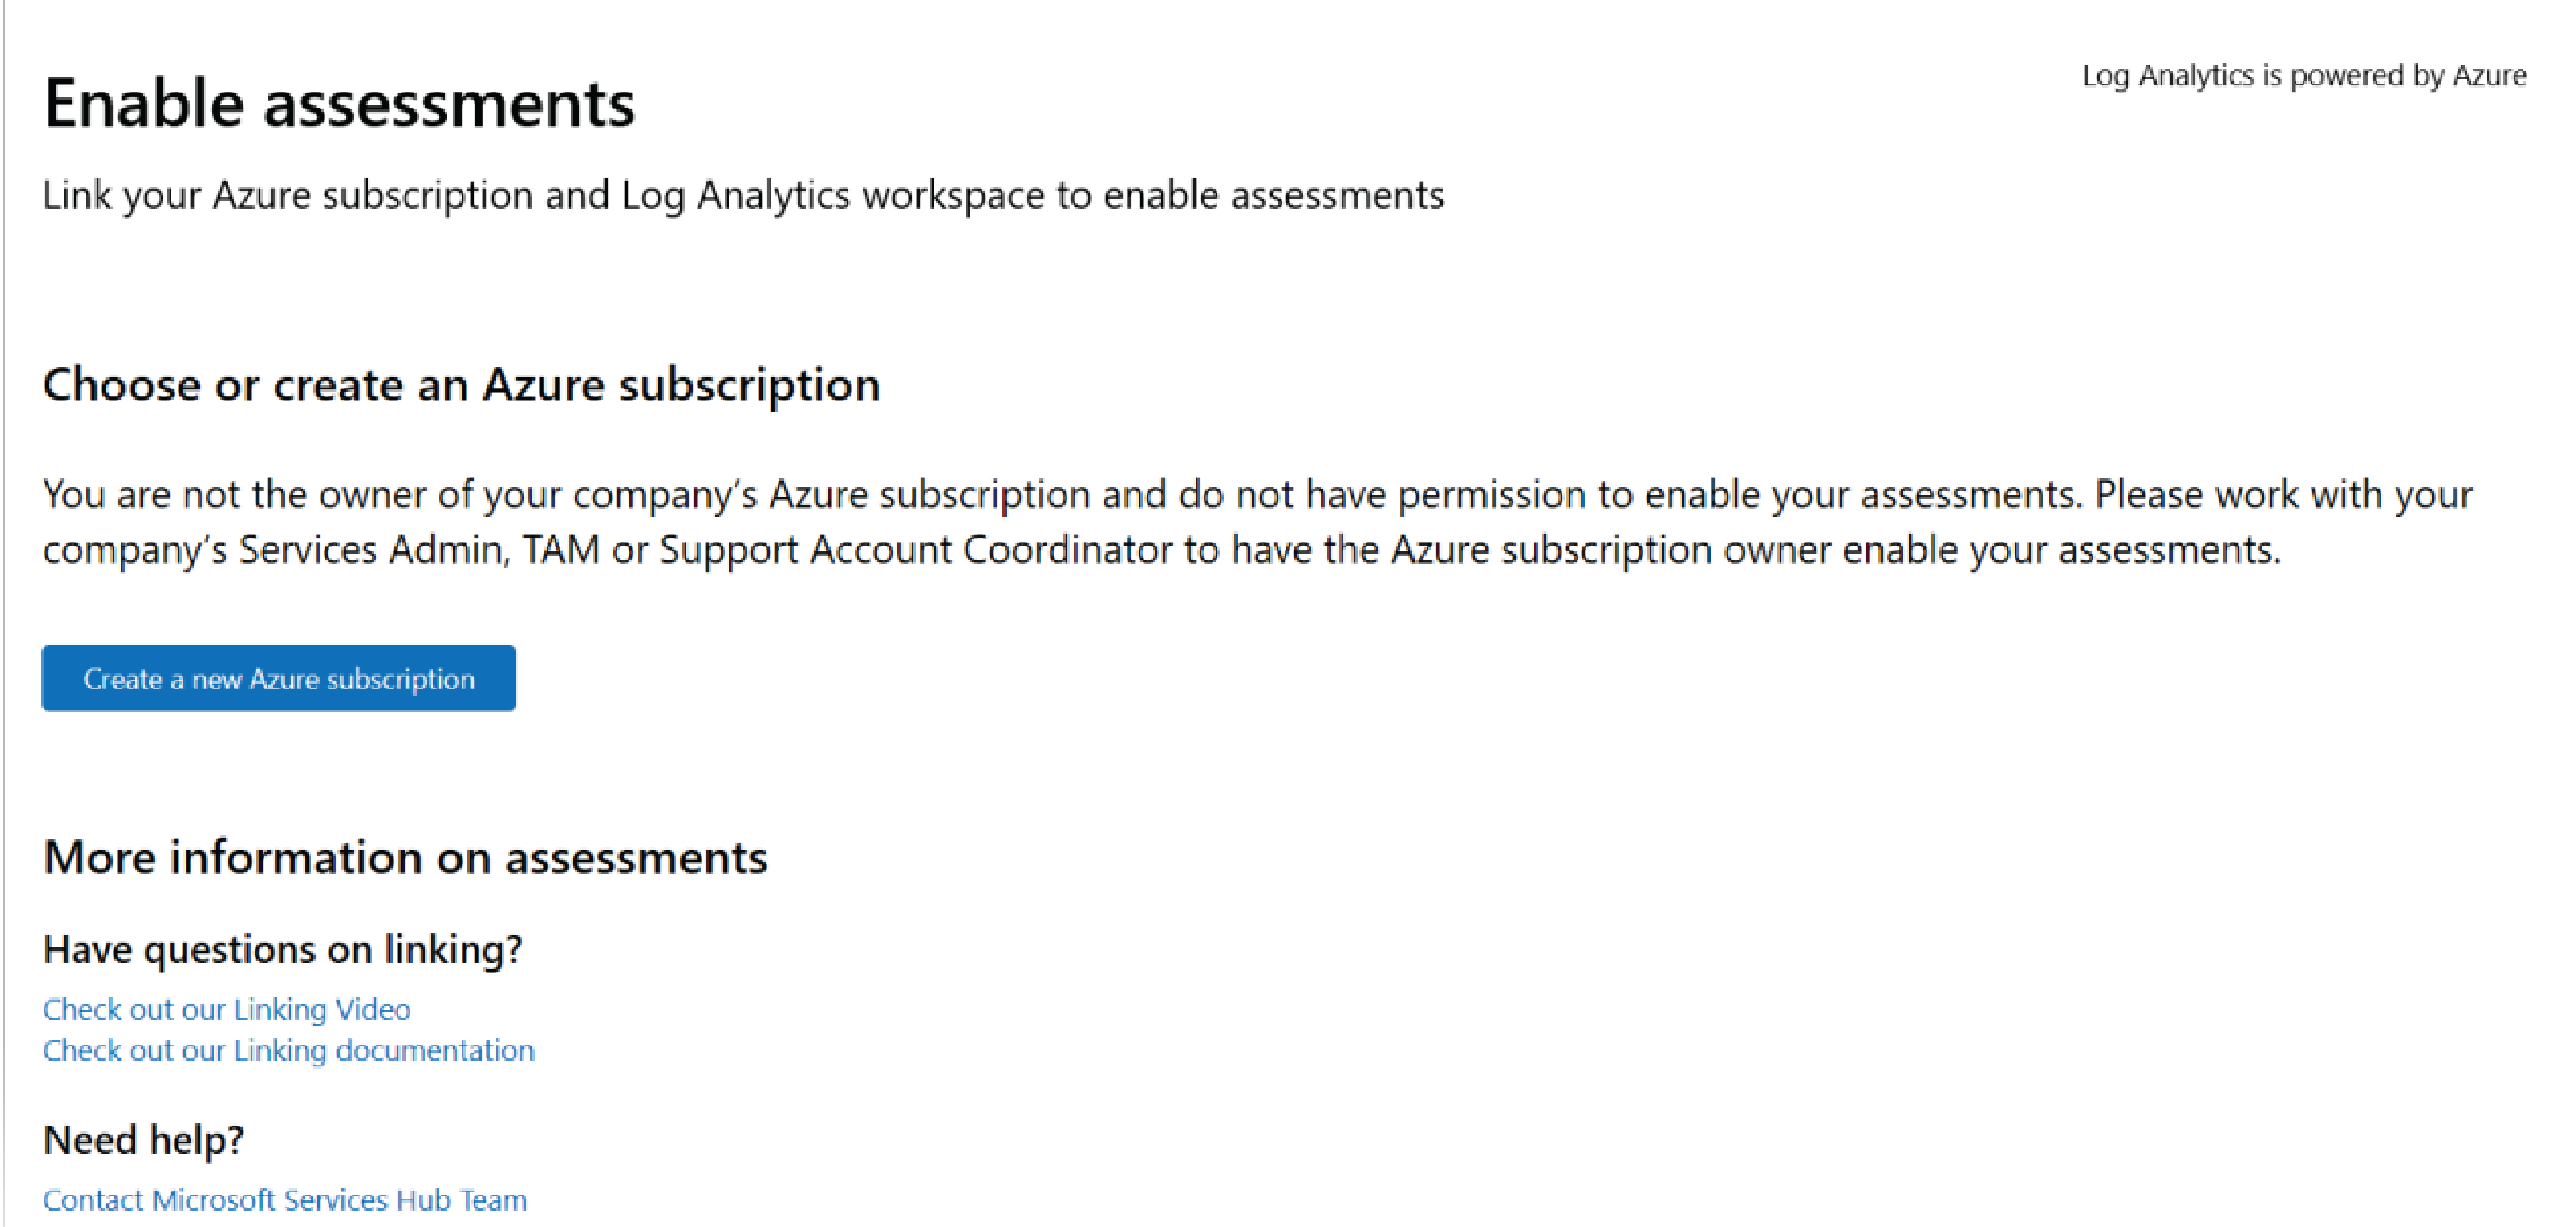 The Enable assessments screen, which shows the Choose or create an Azure subscription text.